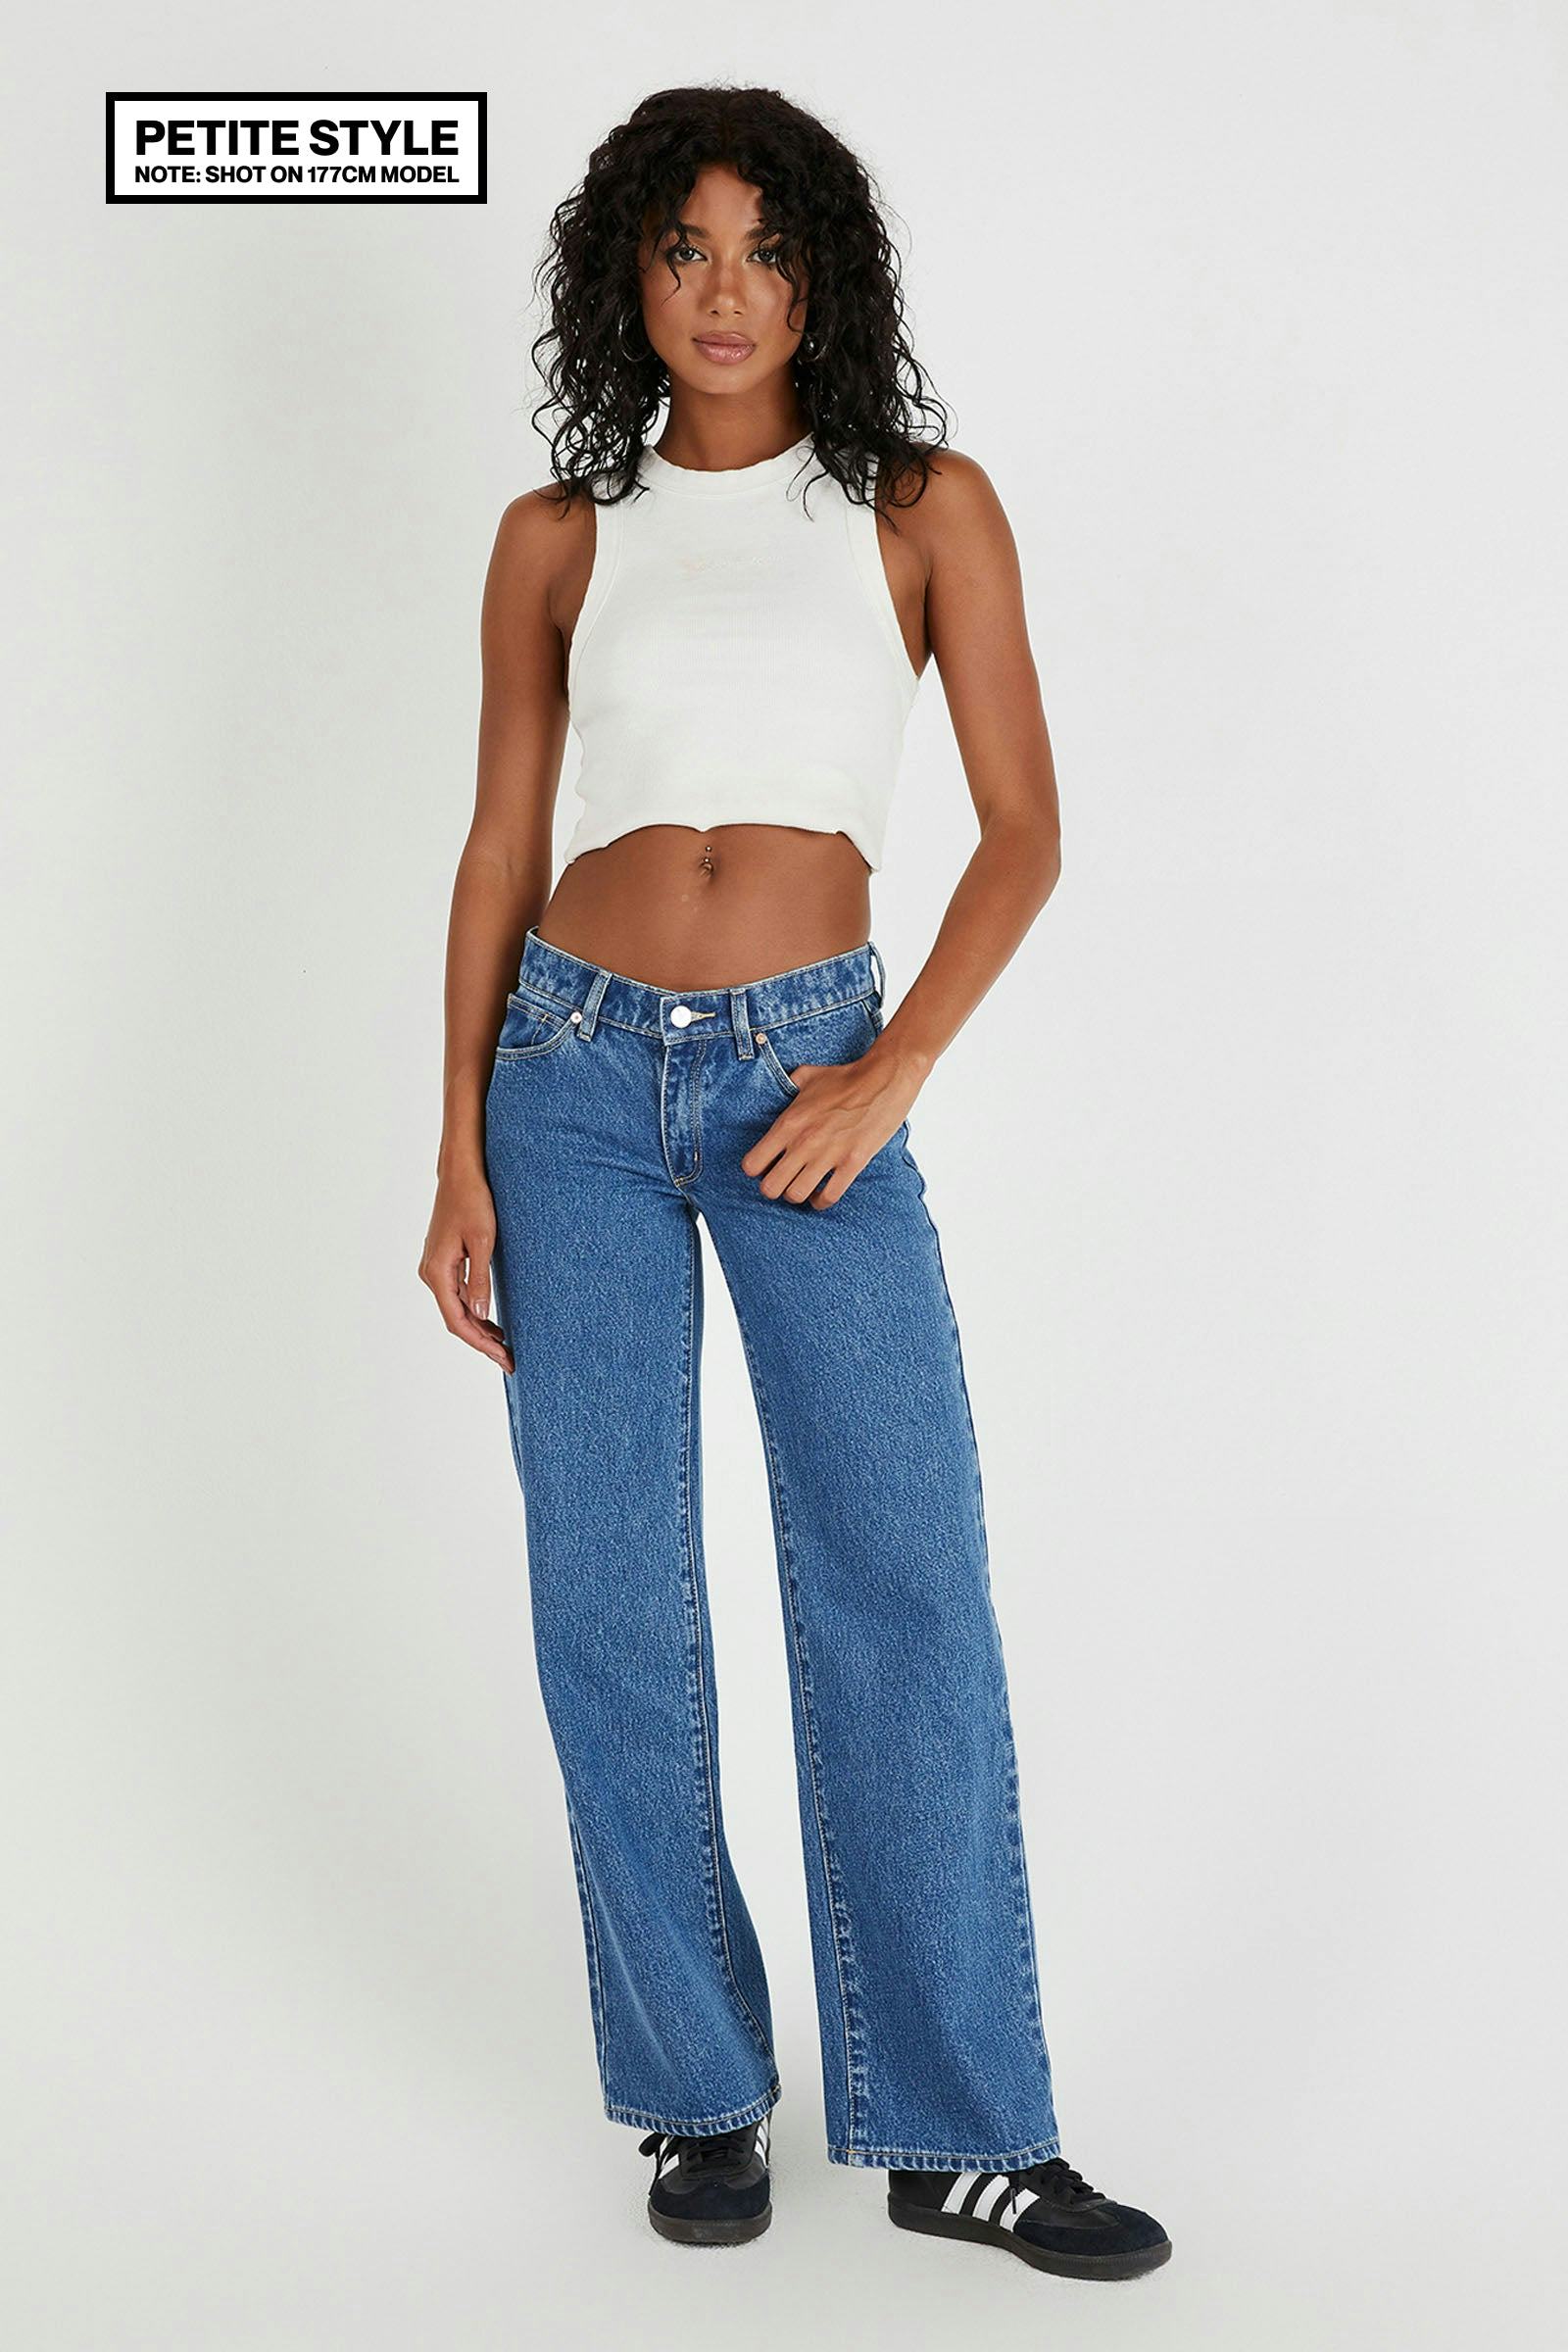 Women's On The Go-to Cropped Bootcut Legging made with Organic